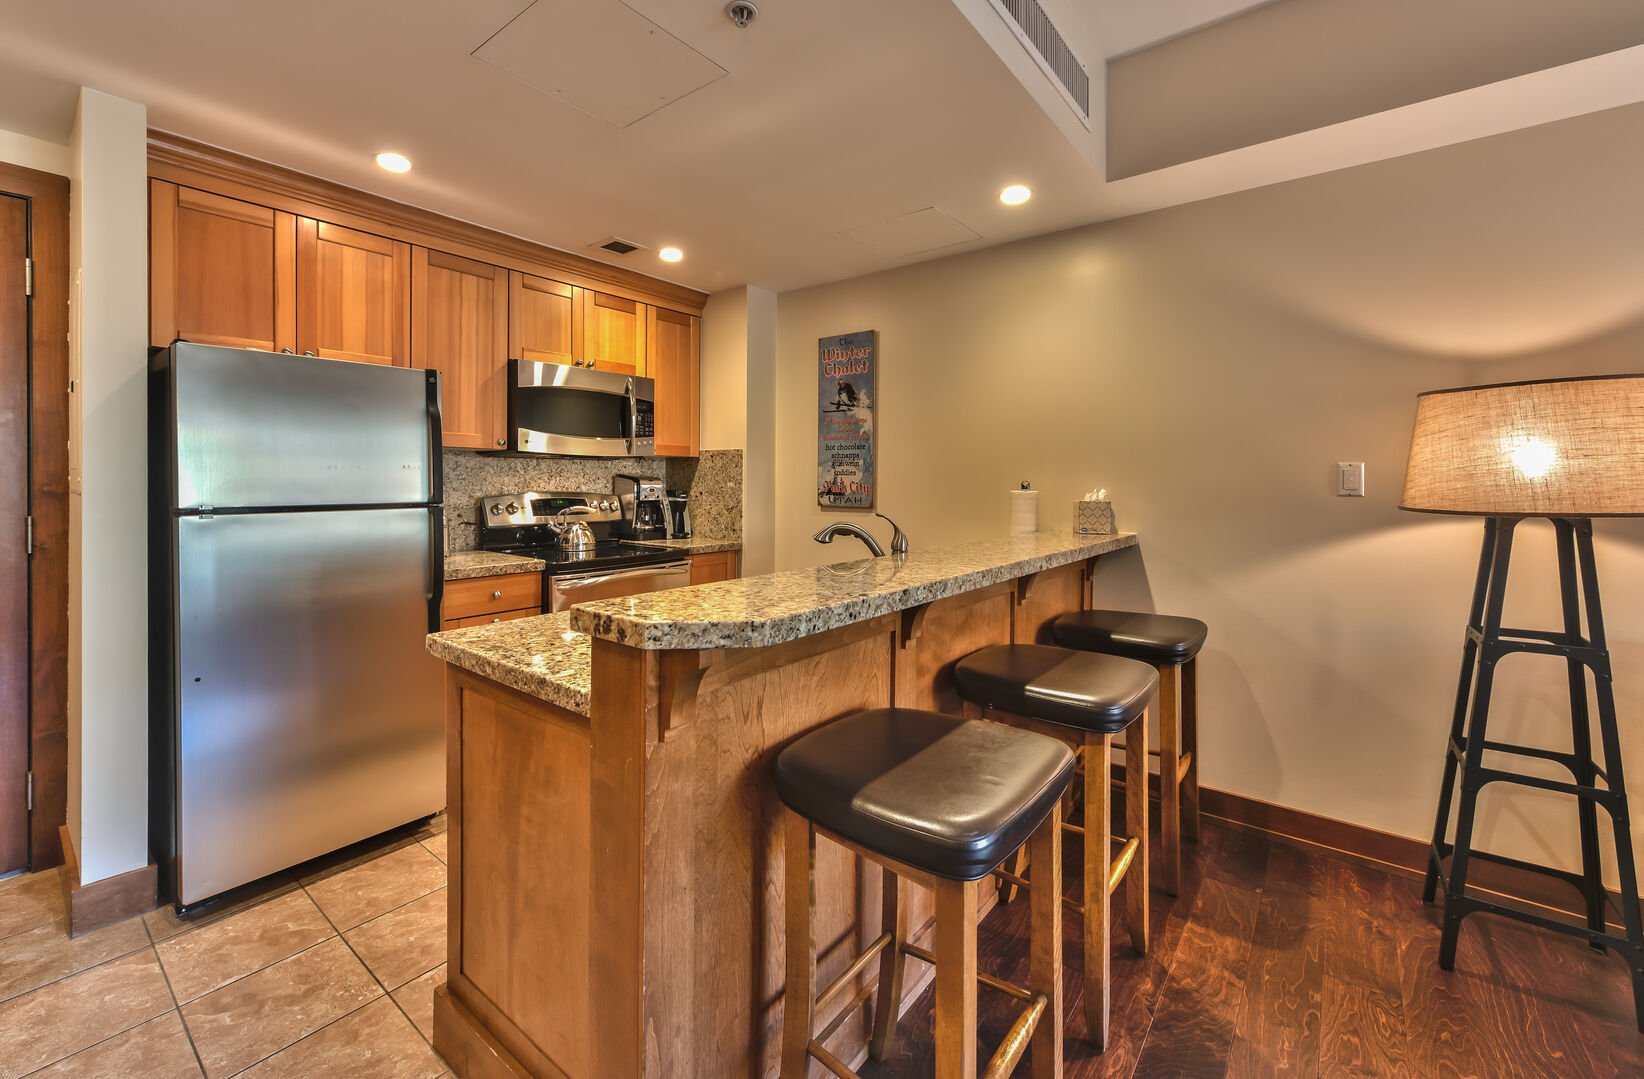 Kitchen featuring granite and stainless steel, barstools for three